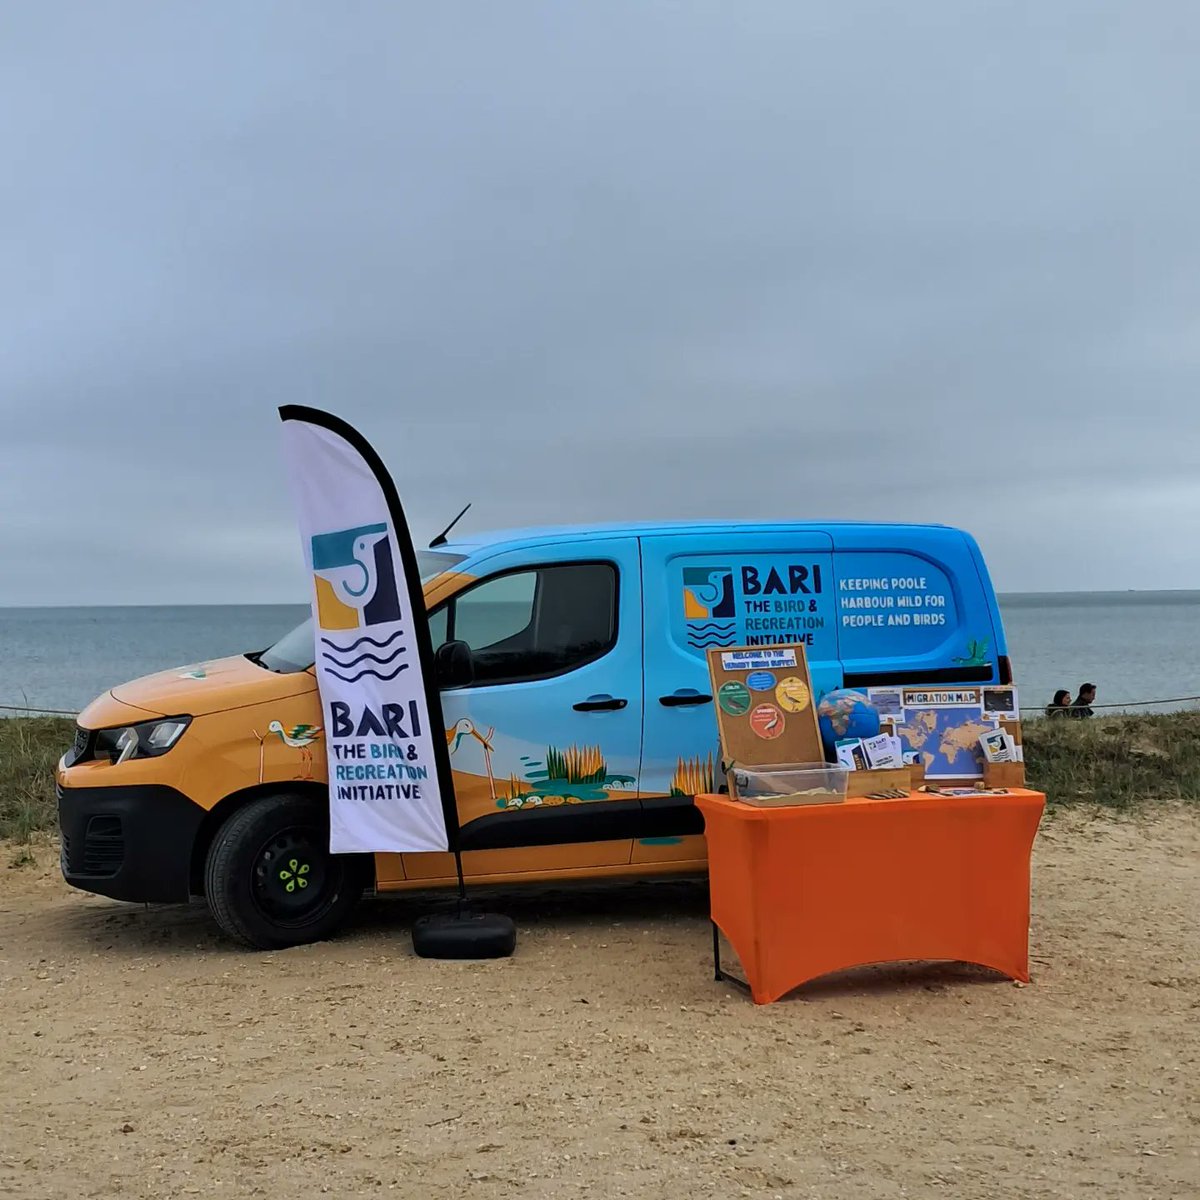 The sun hasn't quite found its way through the clouds yet but its always great to be at Studland Knoll beach, come and say hi 😊

The National Trust team are running a cool migratory bird trail too, give it a try if you're here with the kids 🦆

@nationaltrust